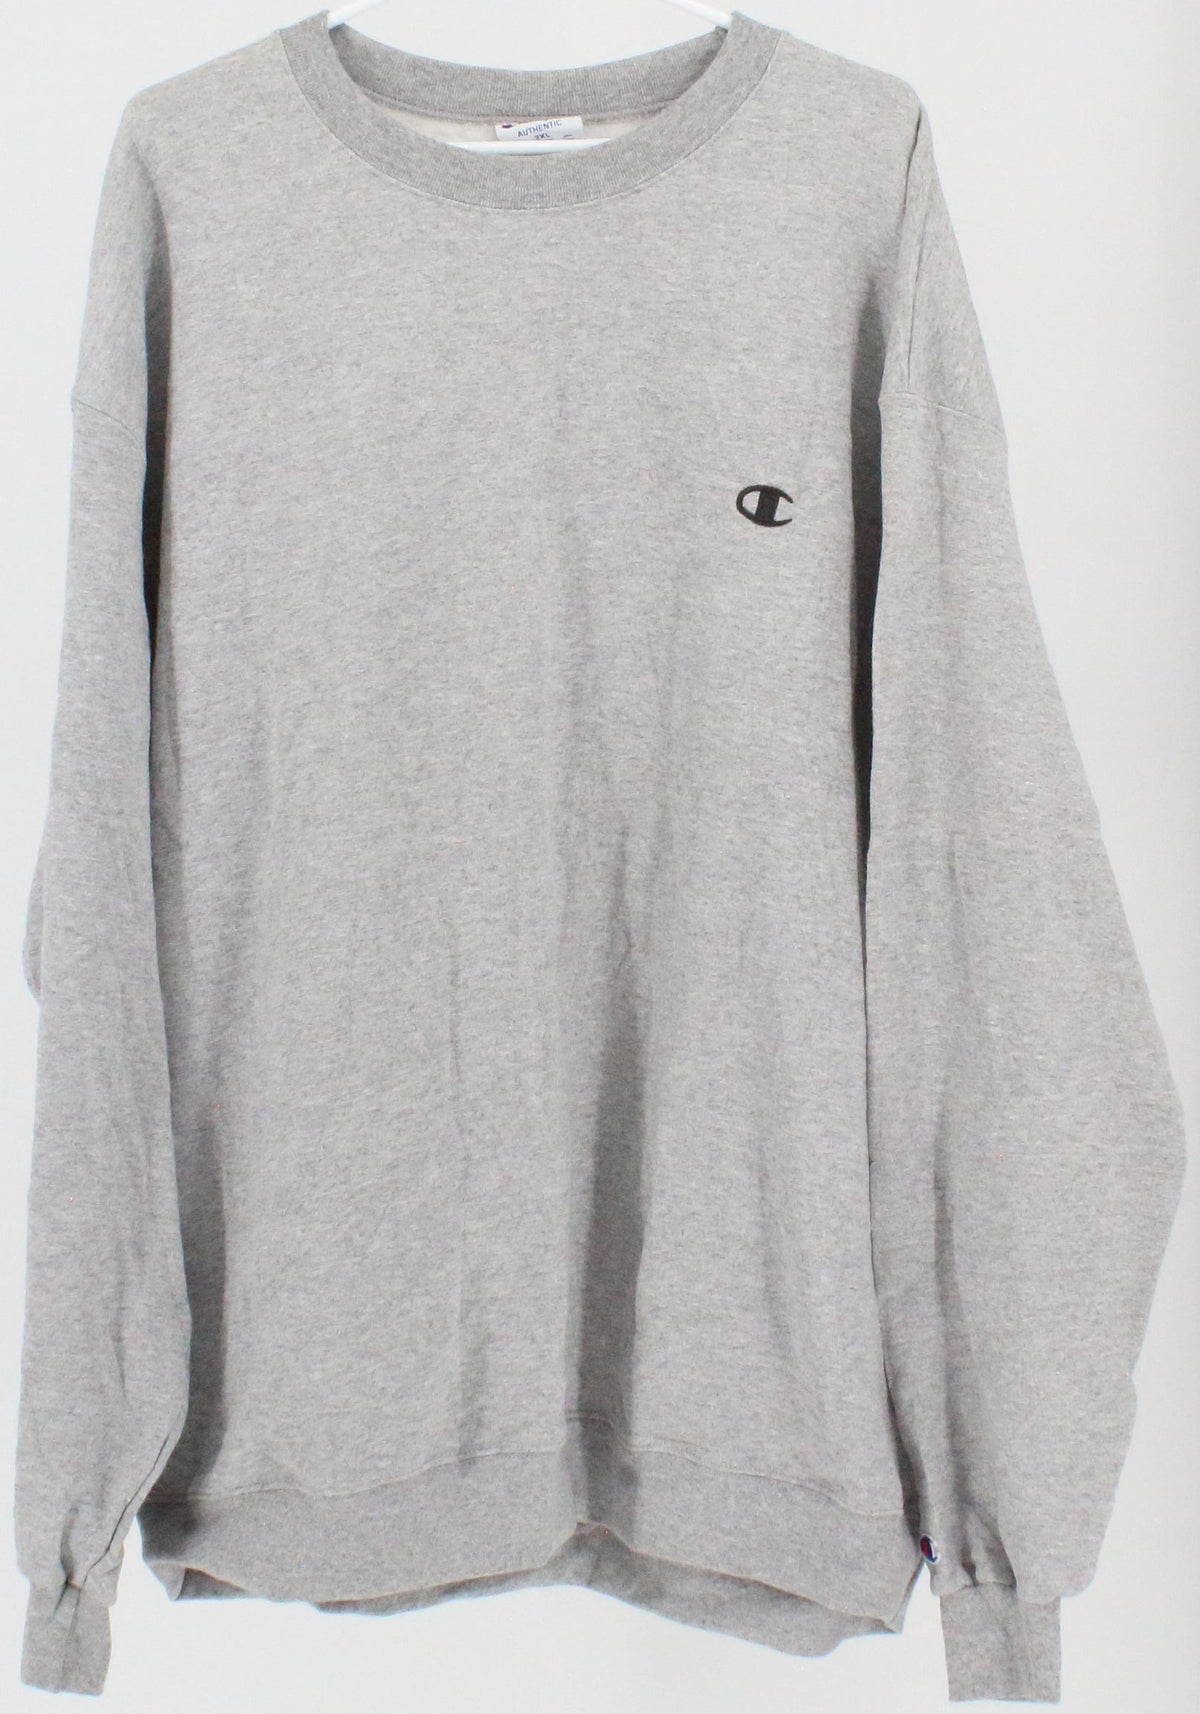 Champion Grey Sweatshirt With Small Black Embroidered Front Logo